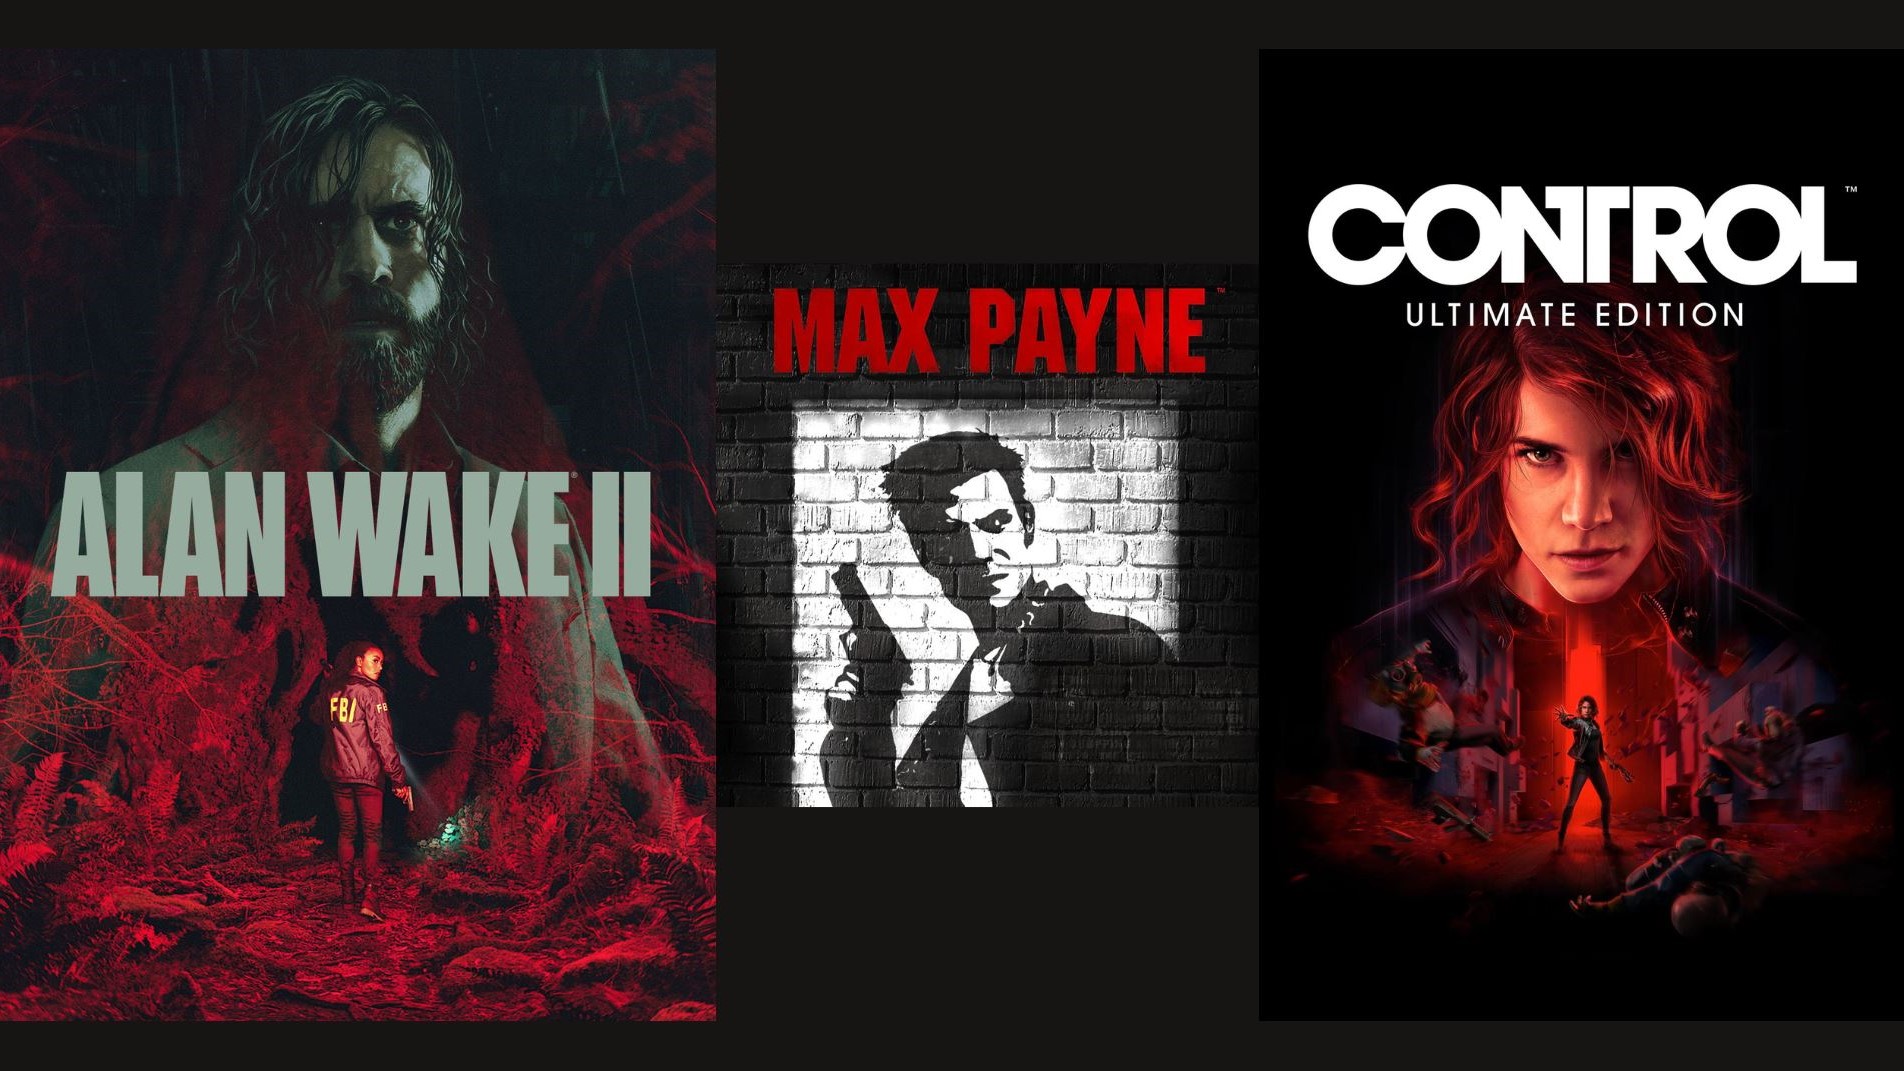 Images of 3 Remedy games, Alan Wake 2, Max Payne, Control